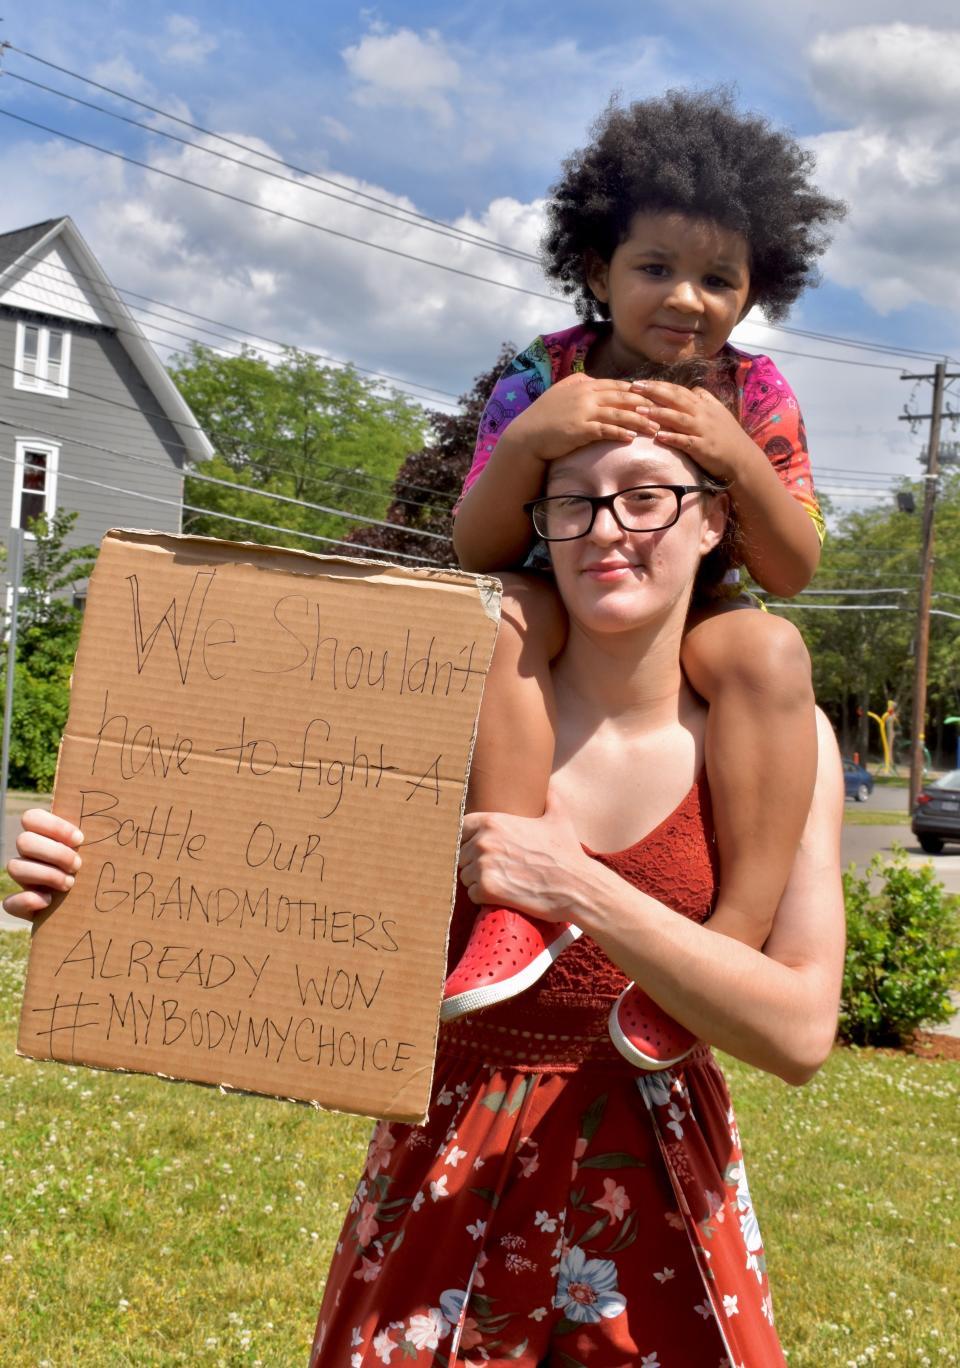 Binghamton resident Percephany Prosser and her 3-year-old daughter, Ariella, hold a sign in support of reproductive rights at a demonstration Monday, June 27, in front of the Family Planning of South Central New York clinic on Hawley Street in Binghamton.